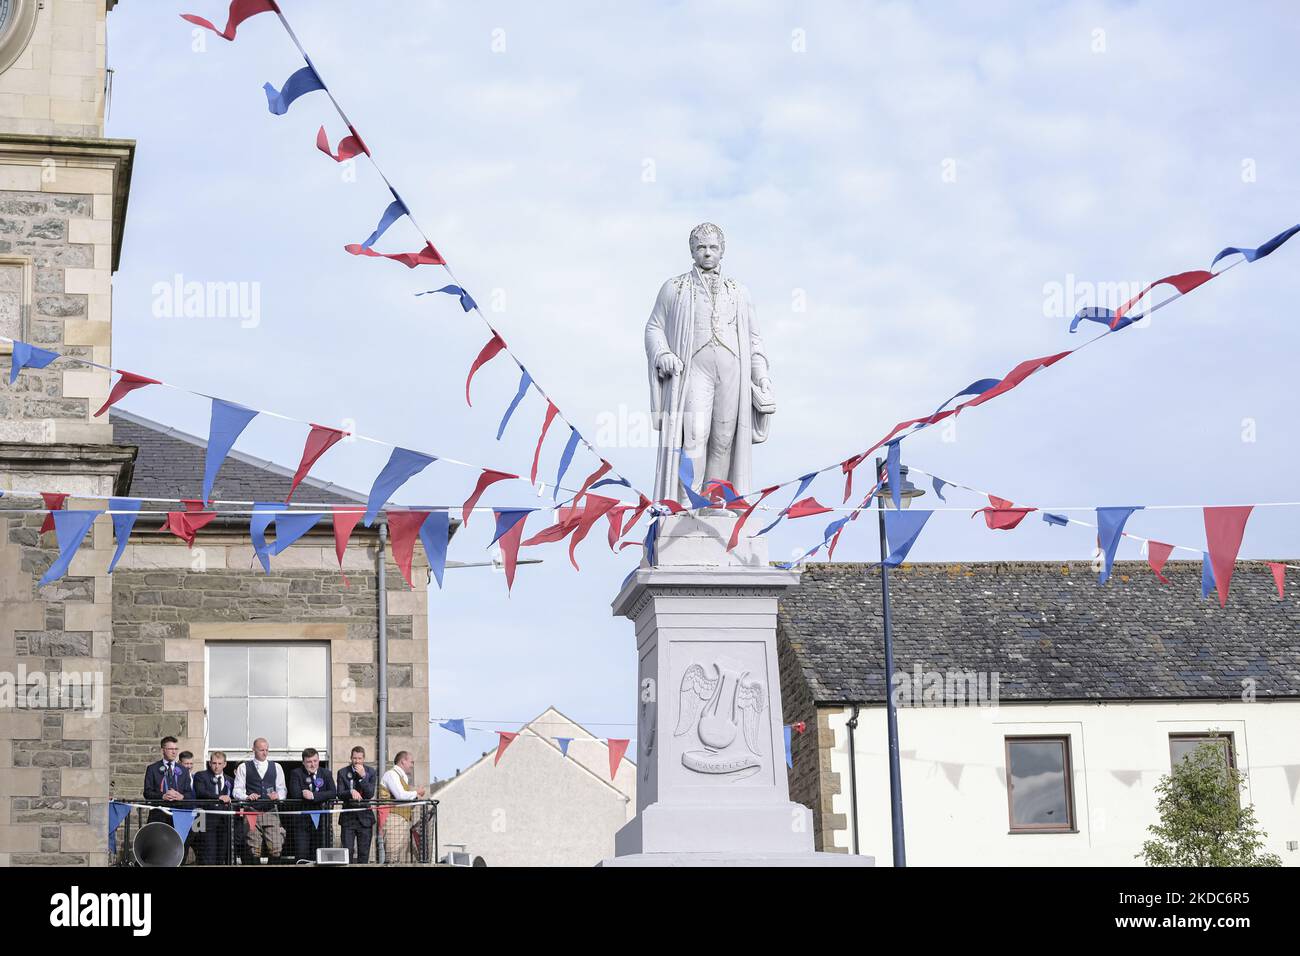 Selkirk, UK. 16.Jun.2022. Selkirk Common Riding 2022. Thursday, The Night afore the Morn. RBSB Nichol and his attendants look on from the Town Hall as Senior Burgh Officer, Mr Graeme Bell led by the Flute band, preambles the streets starting in the West Port, at 1830hrs, stopping at significant junctions while walking a circuit of the Market Place, High Street, Back Row, Kirk Wynd for the “Crying of the Burley” and then onwards to the Victoria Halls, for the United Crafts Colour Bussin. At 2000hrs during the proceedings the Selkirk Ex-Royal Burgh Standard Bearers form up in a parade to march t Stock Photo